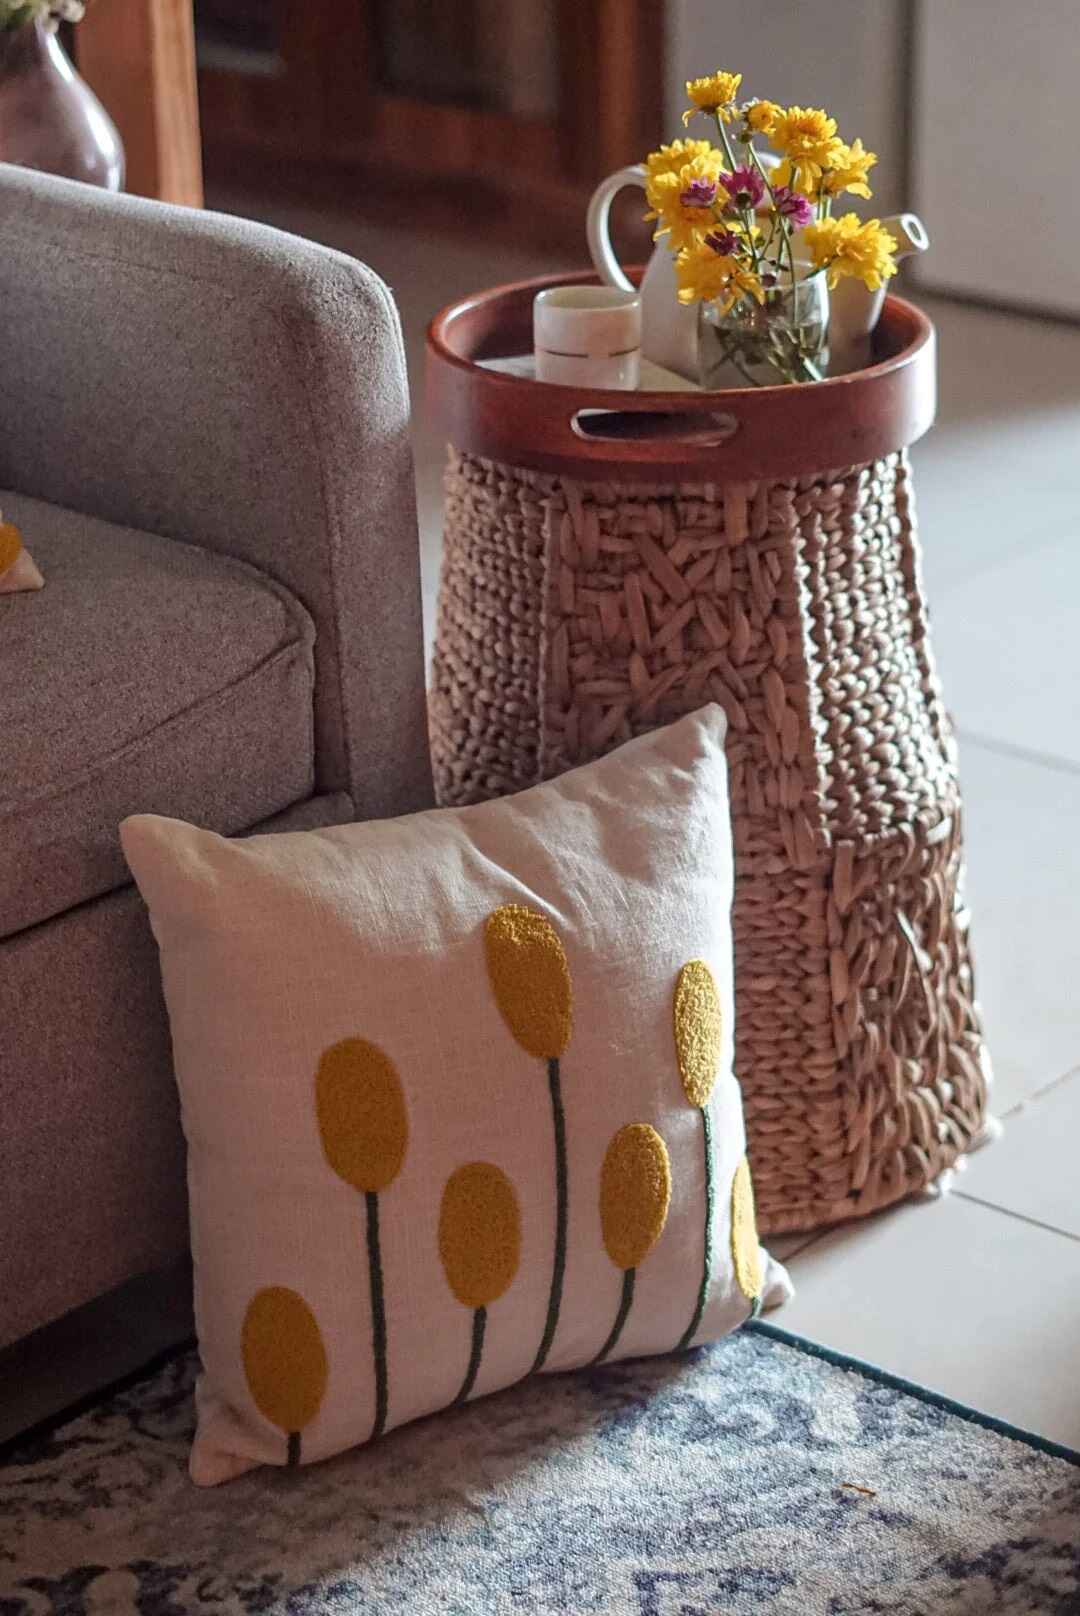 Amber Punch Needle Pillows